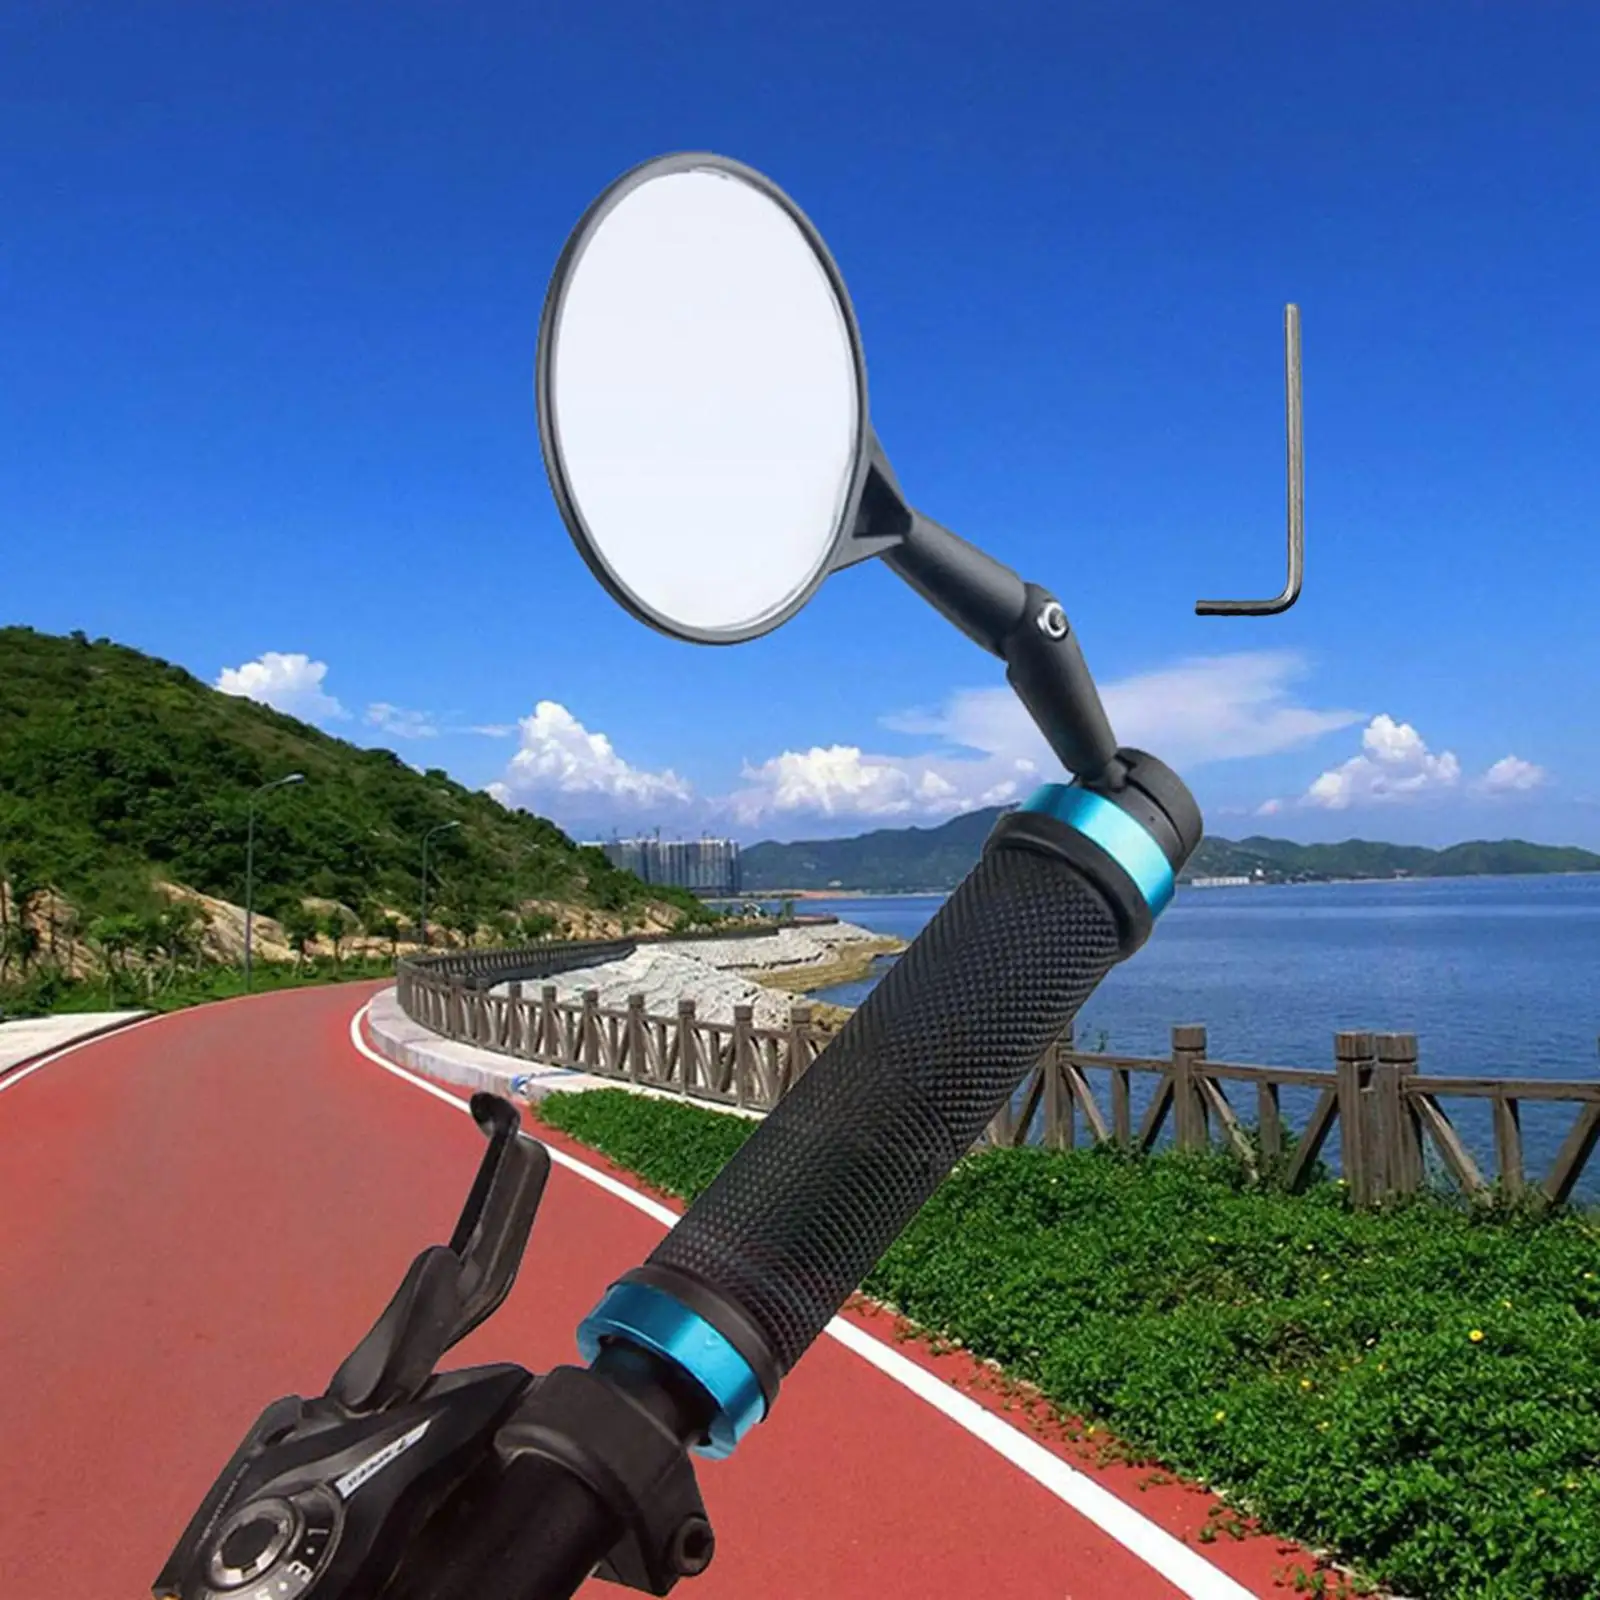 Adjustable Bicycle Convex Rearview Mirror MTB Road Mountain Bike Handlebar Cycling Rear View Mirrors Bike Mirror Safety Tool